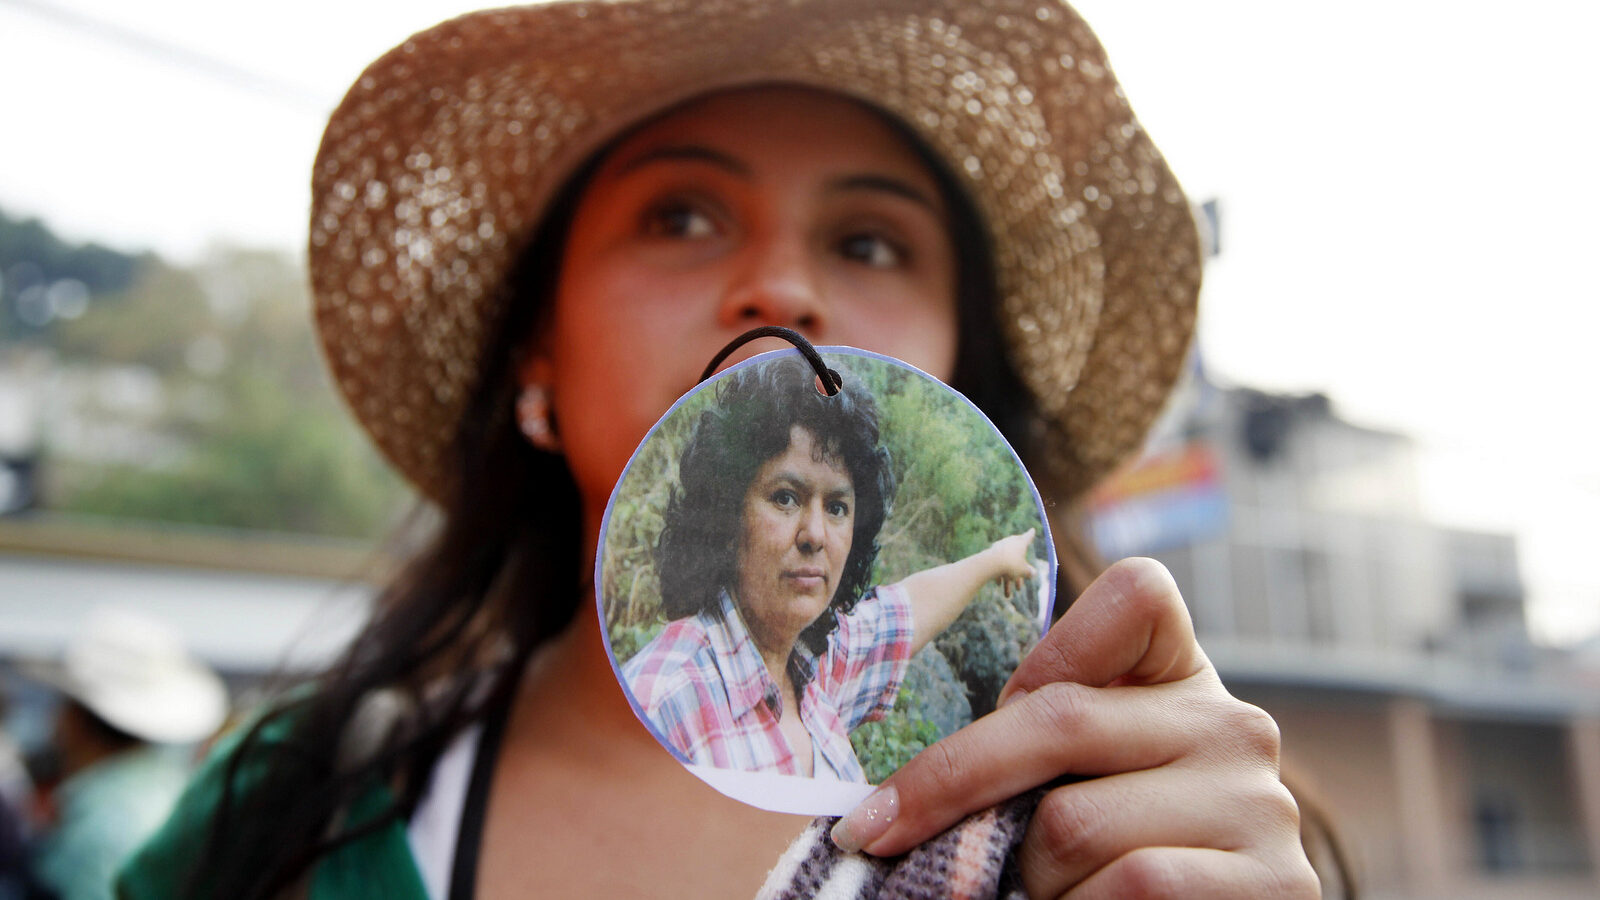 A woman shows a photo of slain environmentalist and indigenous leader and Berta Caceres outside the presidential office in Tegucigalpa, Honduras, Monday, May 9, 2016. (AP/Fernando Antonio)